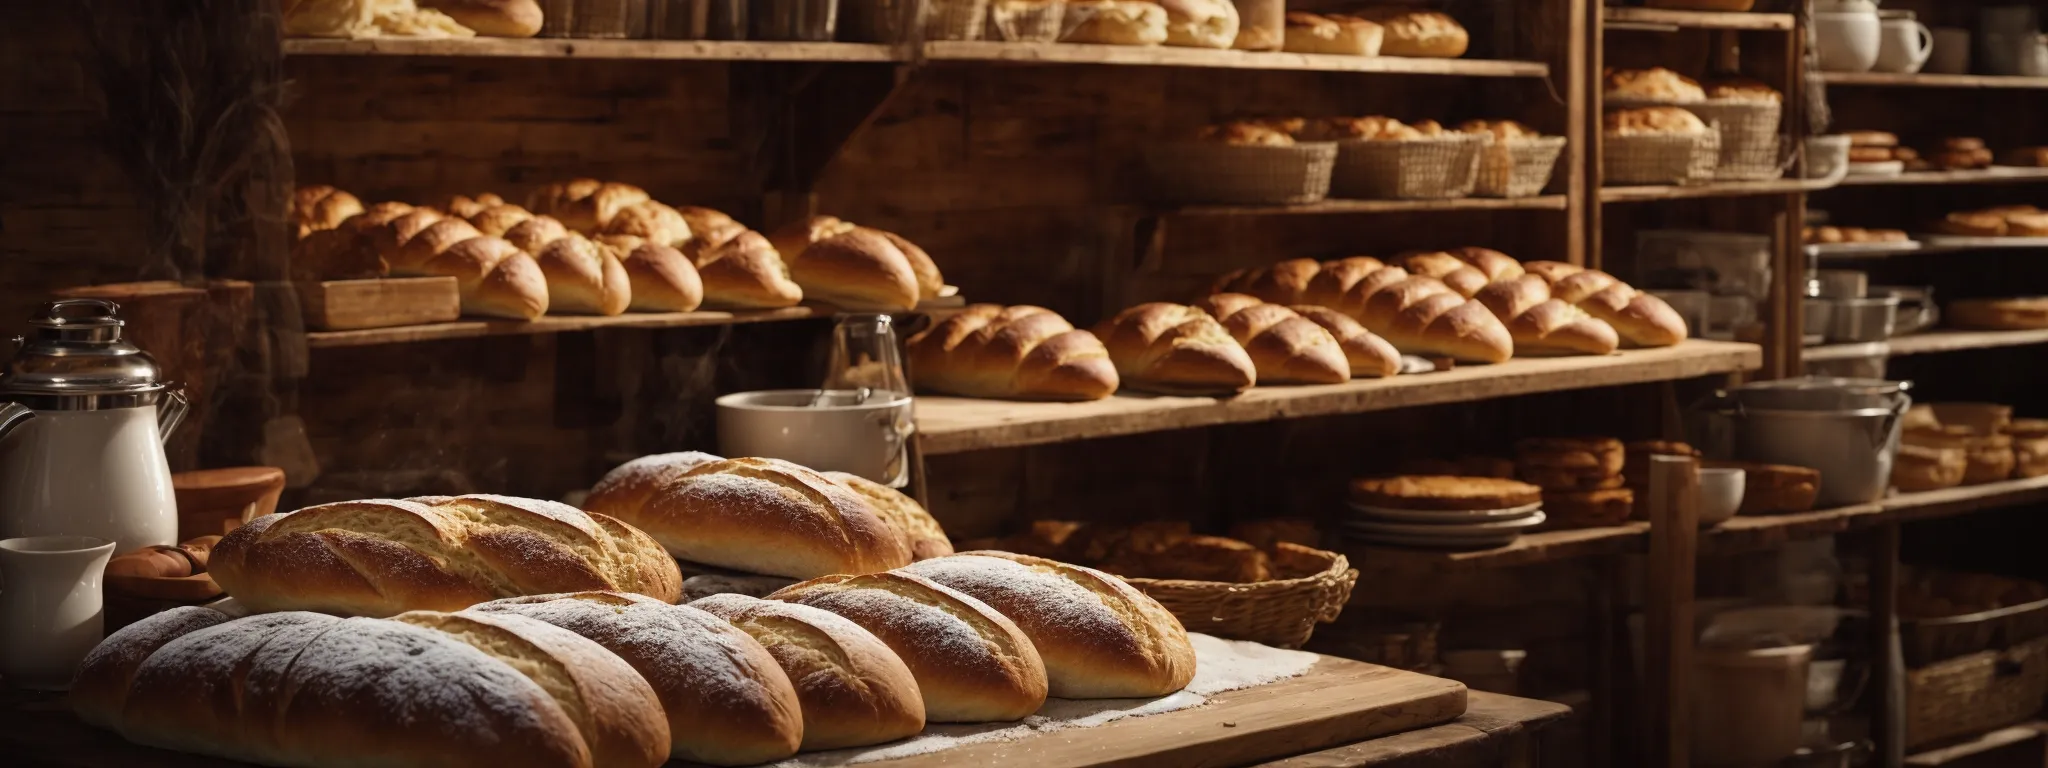 a bustling bakery kitchen warmly lit, with freshly baked bread arrayed on rustic wooden shelves and an open recipe book nearby.